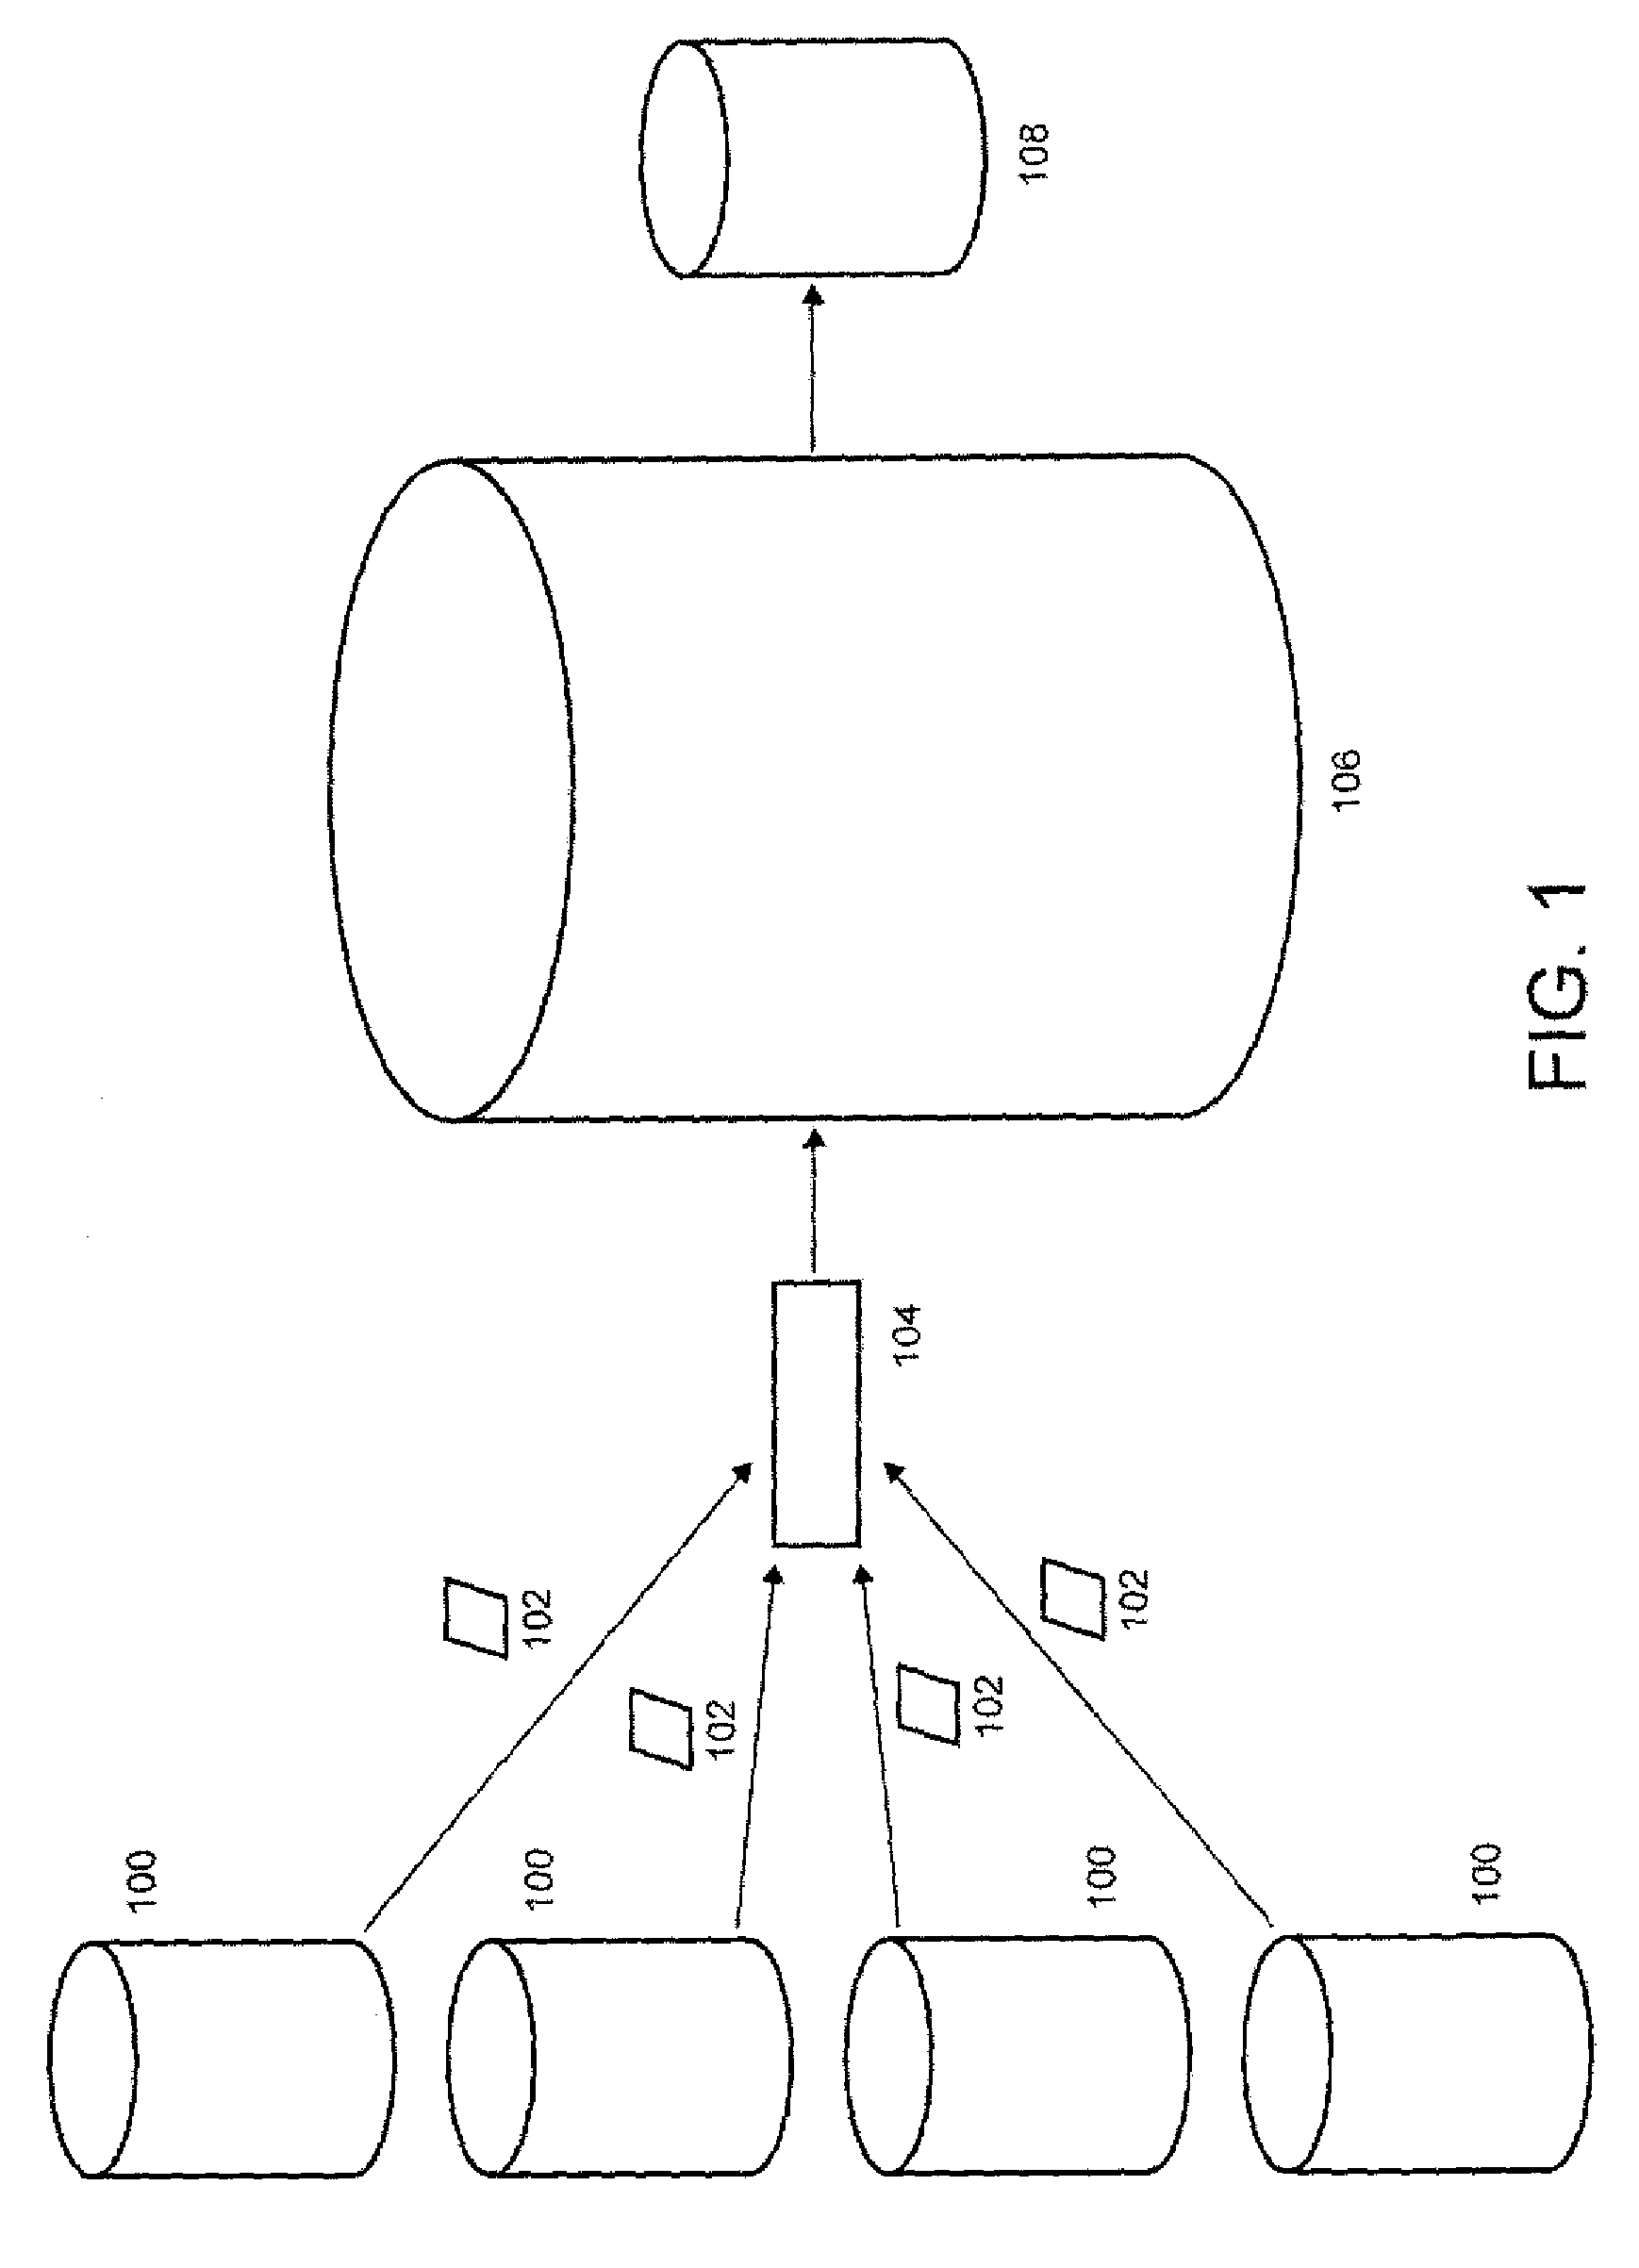 Method and Apparatus for Automated Monitoring of System Status